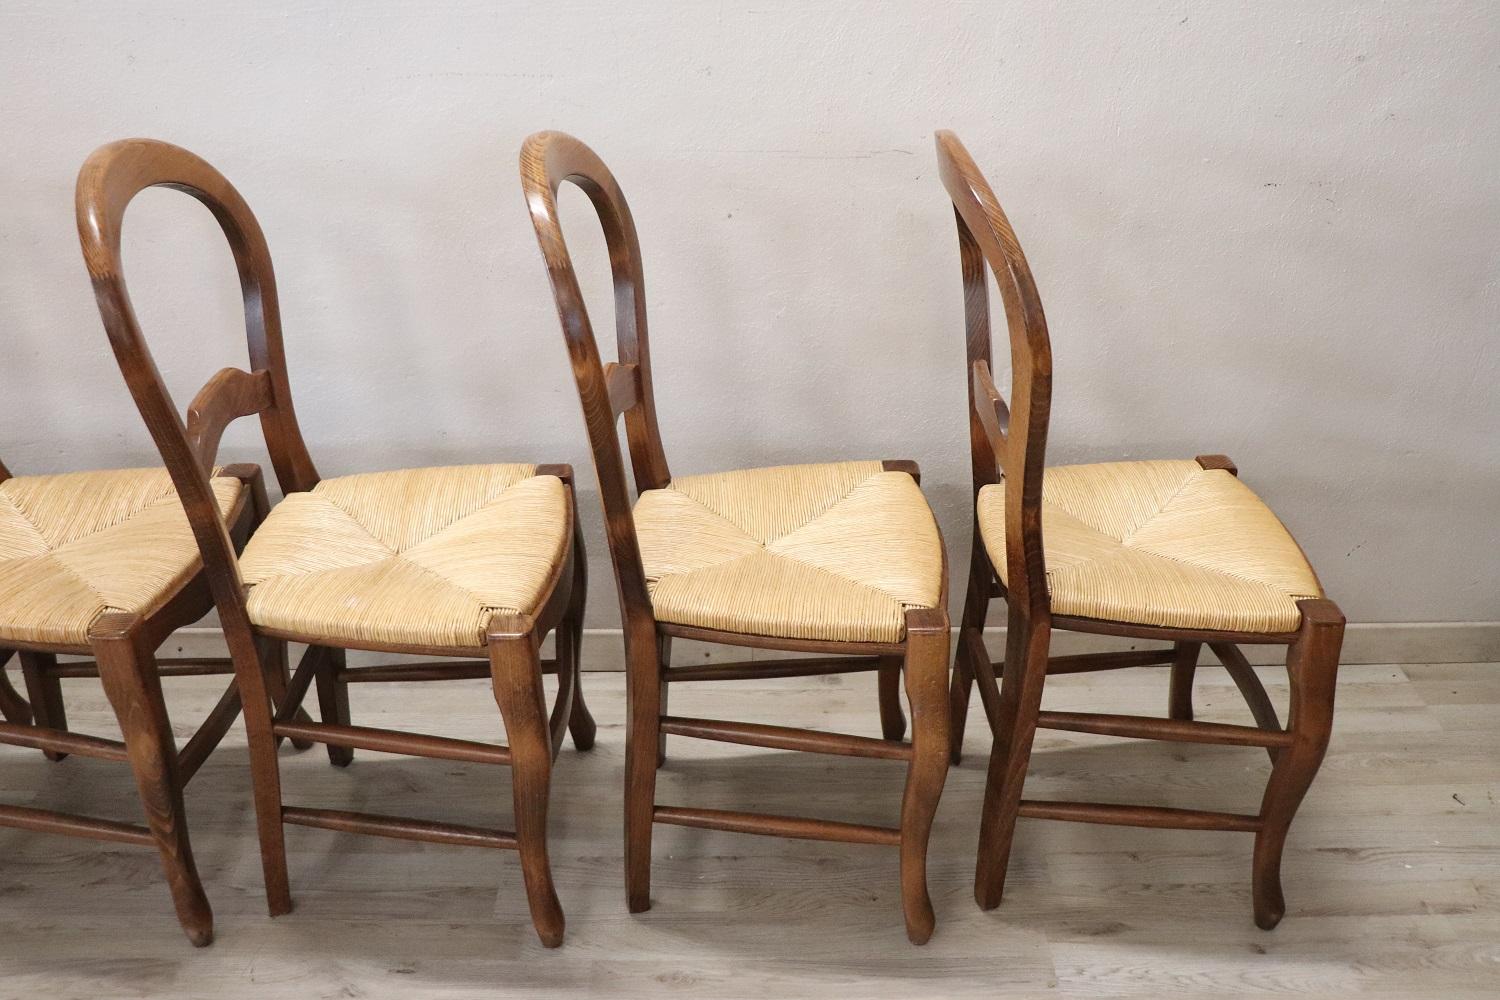 20th Century Solid Beech Wood Set of Six Chairs with Straw Seat 1